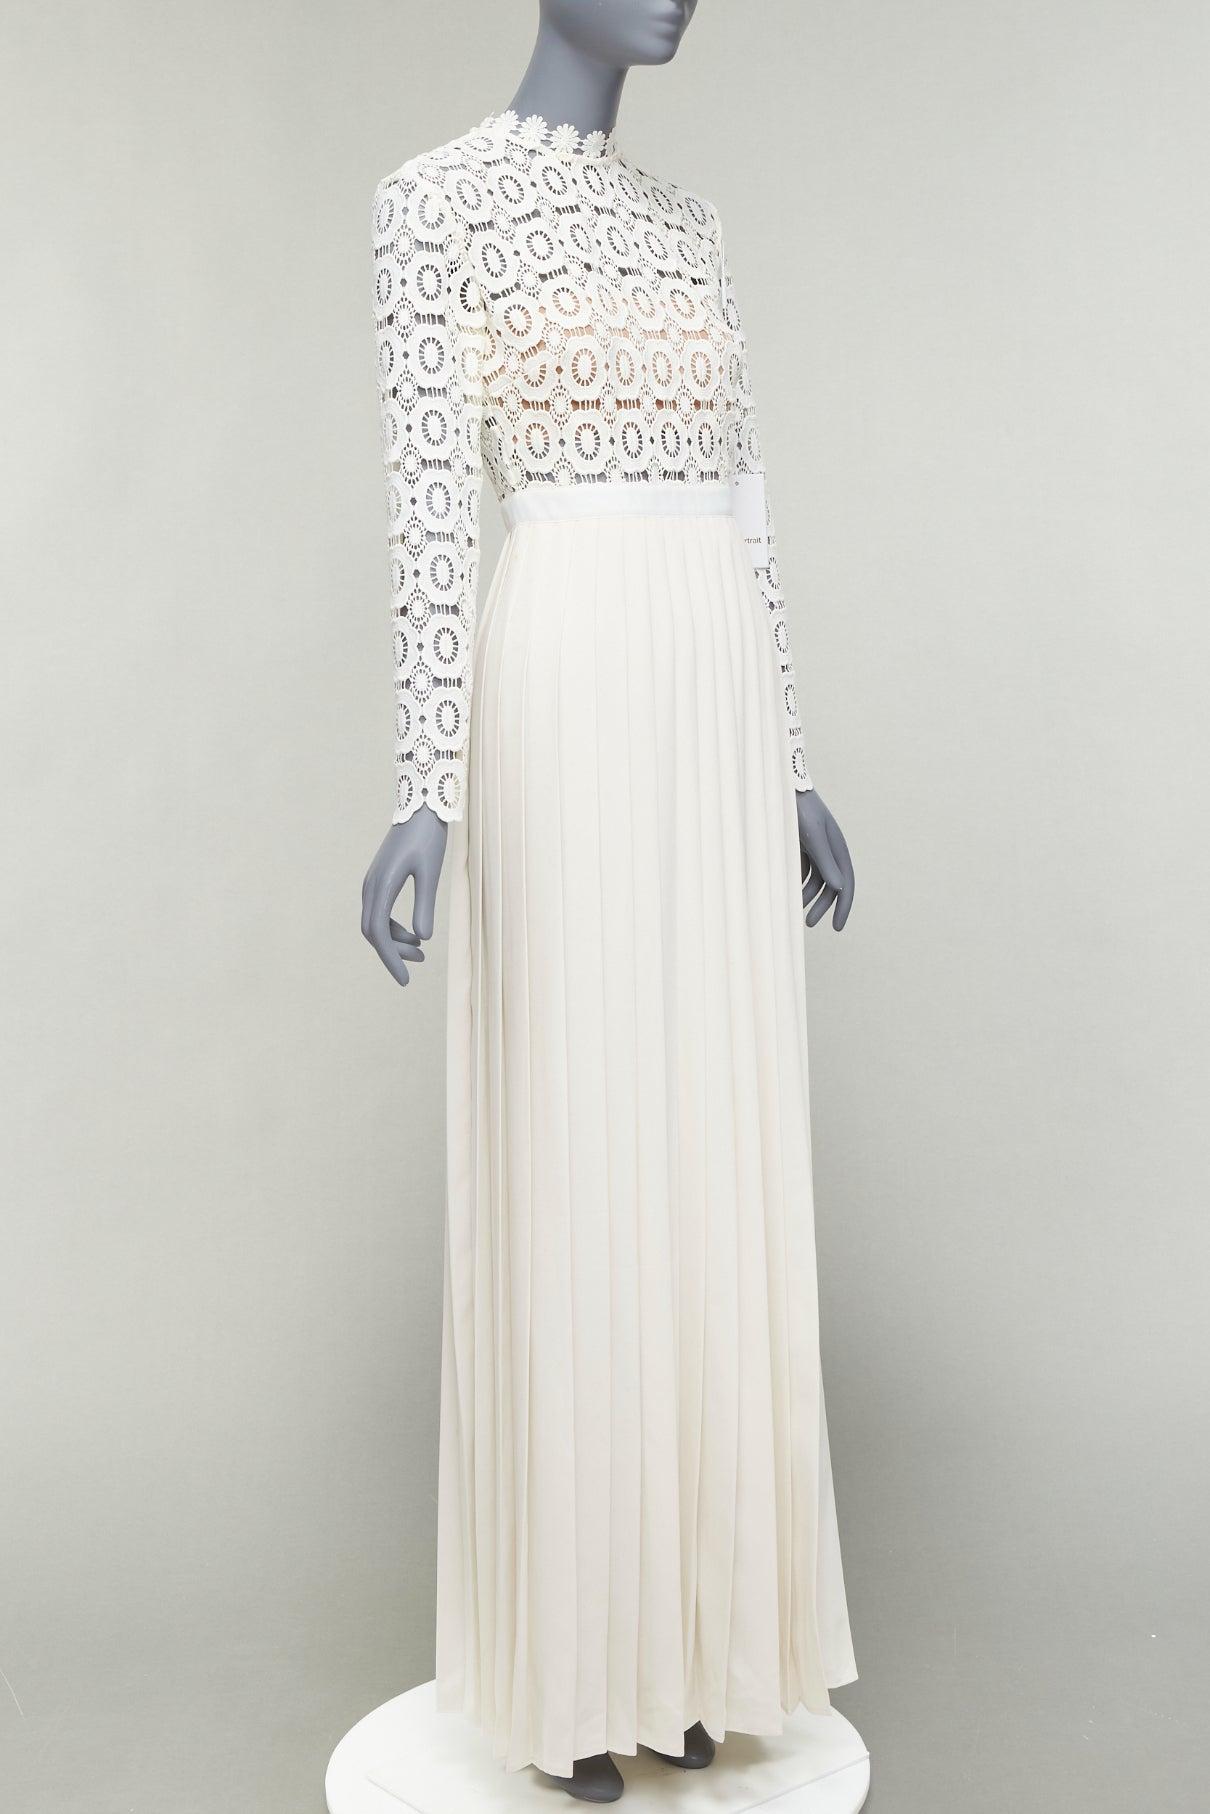 SELF PORTRAIT white floral lace pleated high slit dress UK6 XS Kate Middleton
Reference: CELG/A00376
Brand: Self Portrait
As seen on: Kate Middleton
Material: Viscose, Cotton
Color: Cream, White
Pattern: Lace
Closure: Zip
Lining: Cream Fabric
Extra